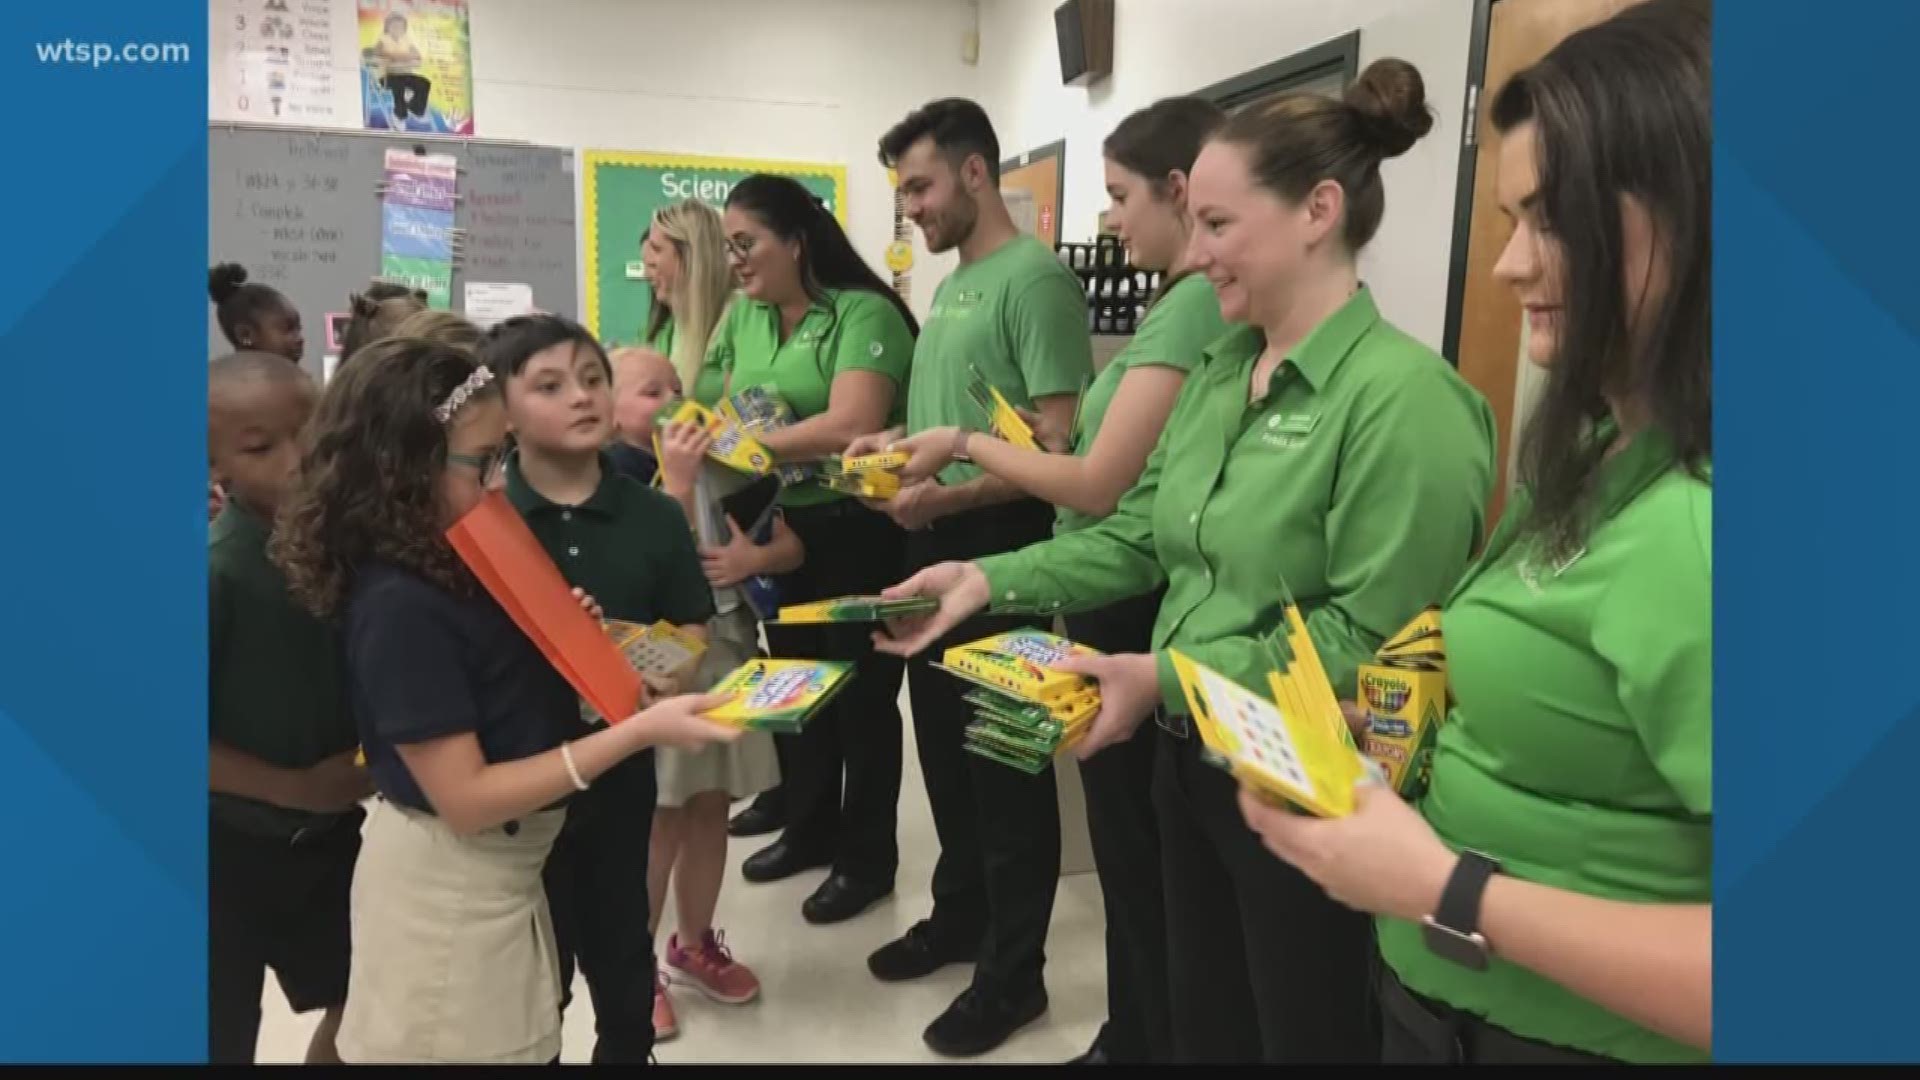 Tools for School deliveries often bring cheers, but on Friday at Mort Elementary, the big box of supplies brought a teacher to tears.